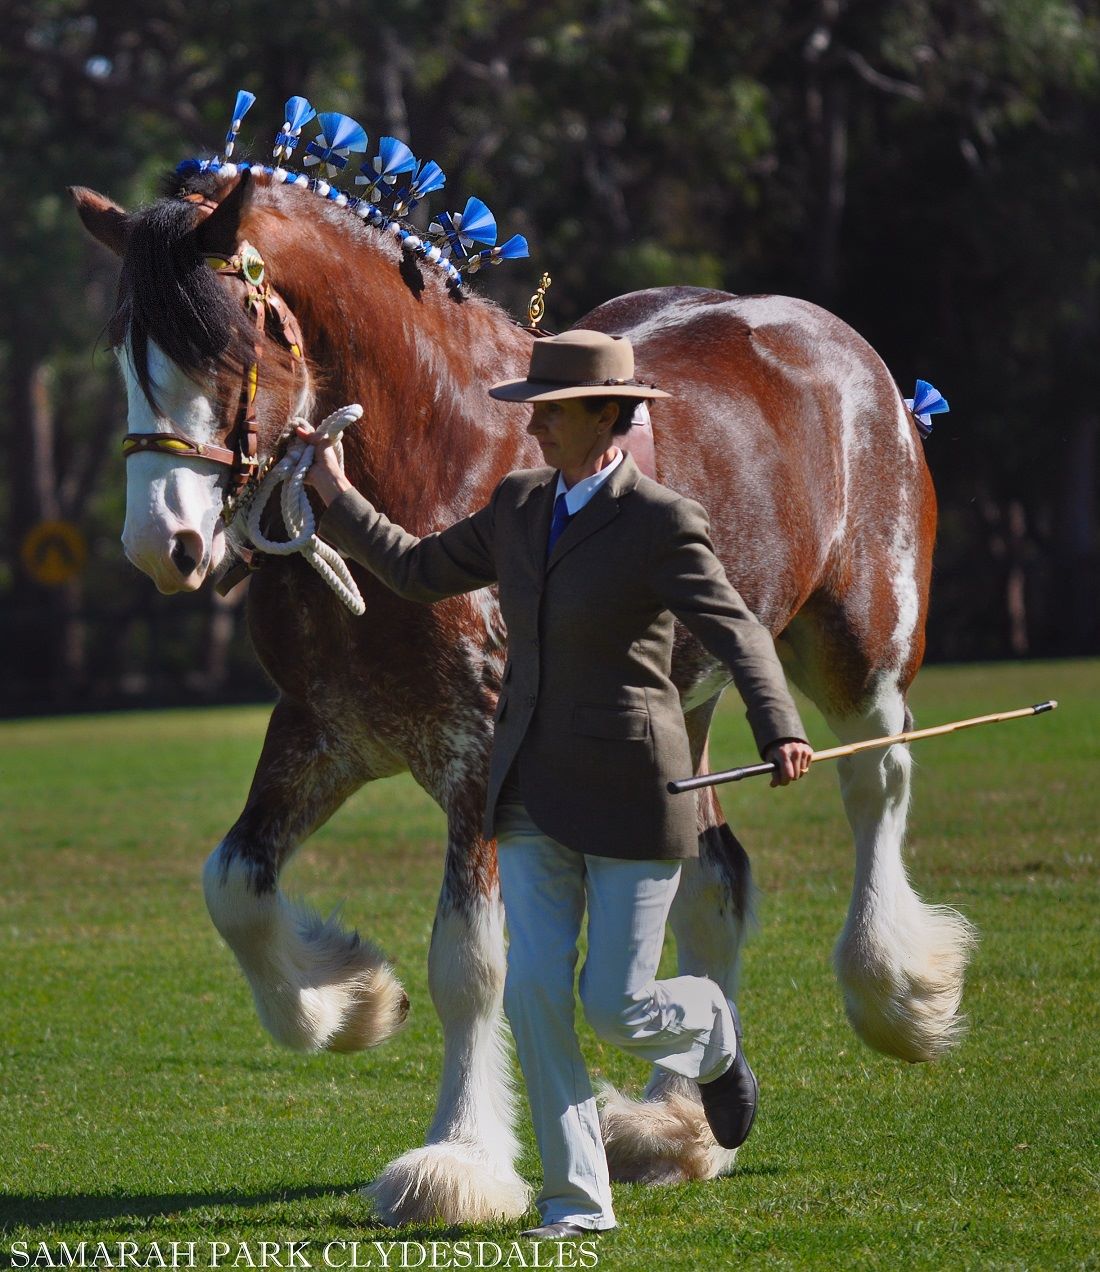 Clydesdale Stallion @Samarah Park Clydesdale Stud, New South Wales, Australia